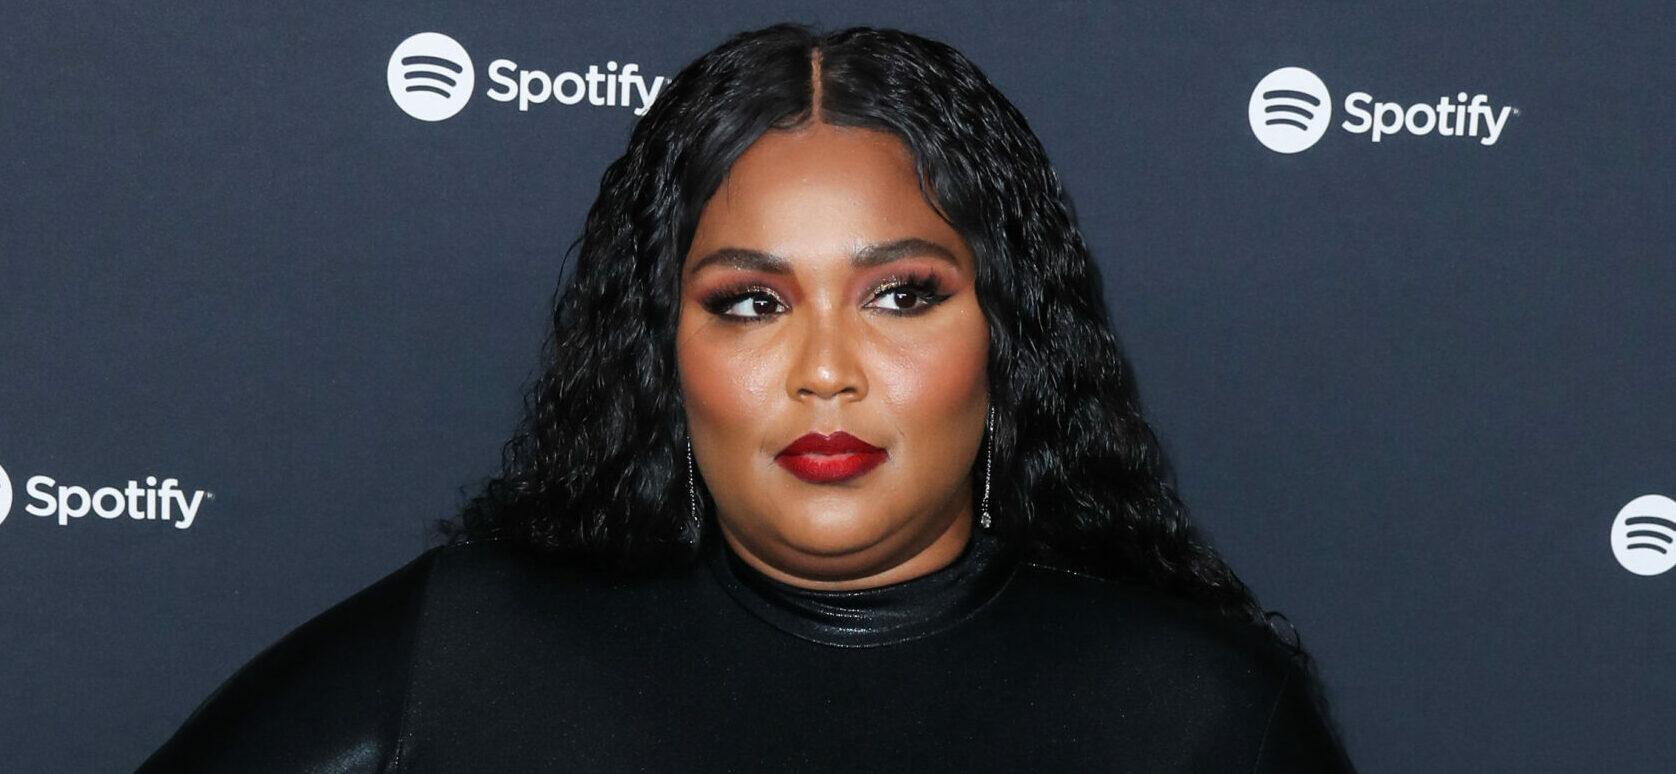 Spotify Best New Artist 2020 Party held at The Lot Studios on January 23, 2020 in West Hollywood, Los Angeles, California, United States. 23 Jan 2020 Pictured: Lizzo.